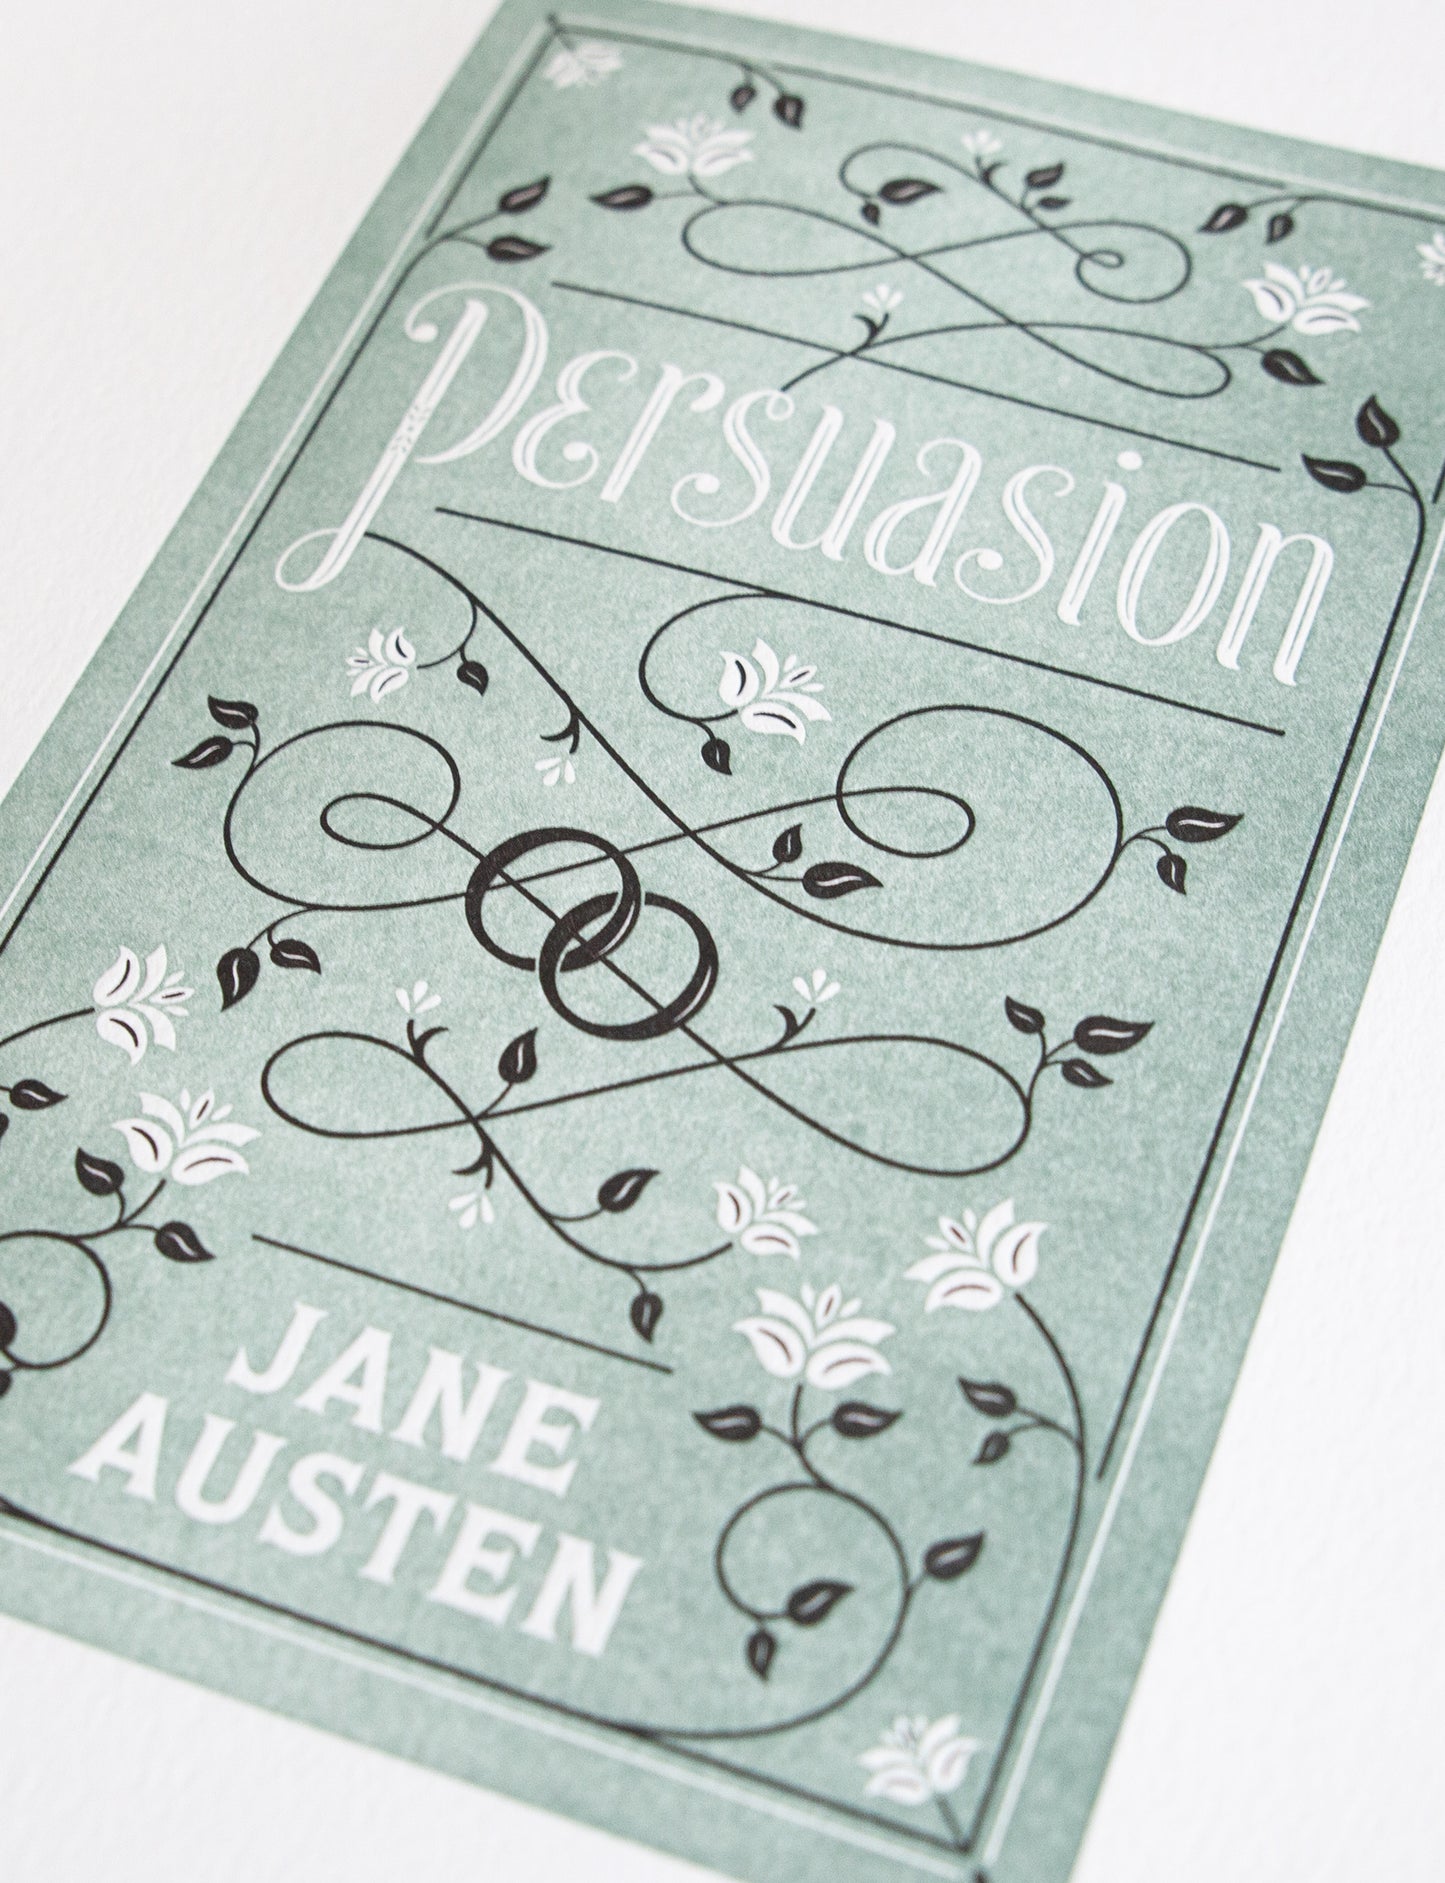 Close-up of a 2-color letterpress print in green and black. Printed artwork is an illustrated book cover of Persuasion including custom hand lettering.